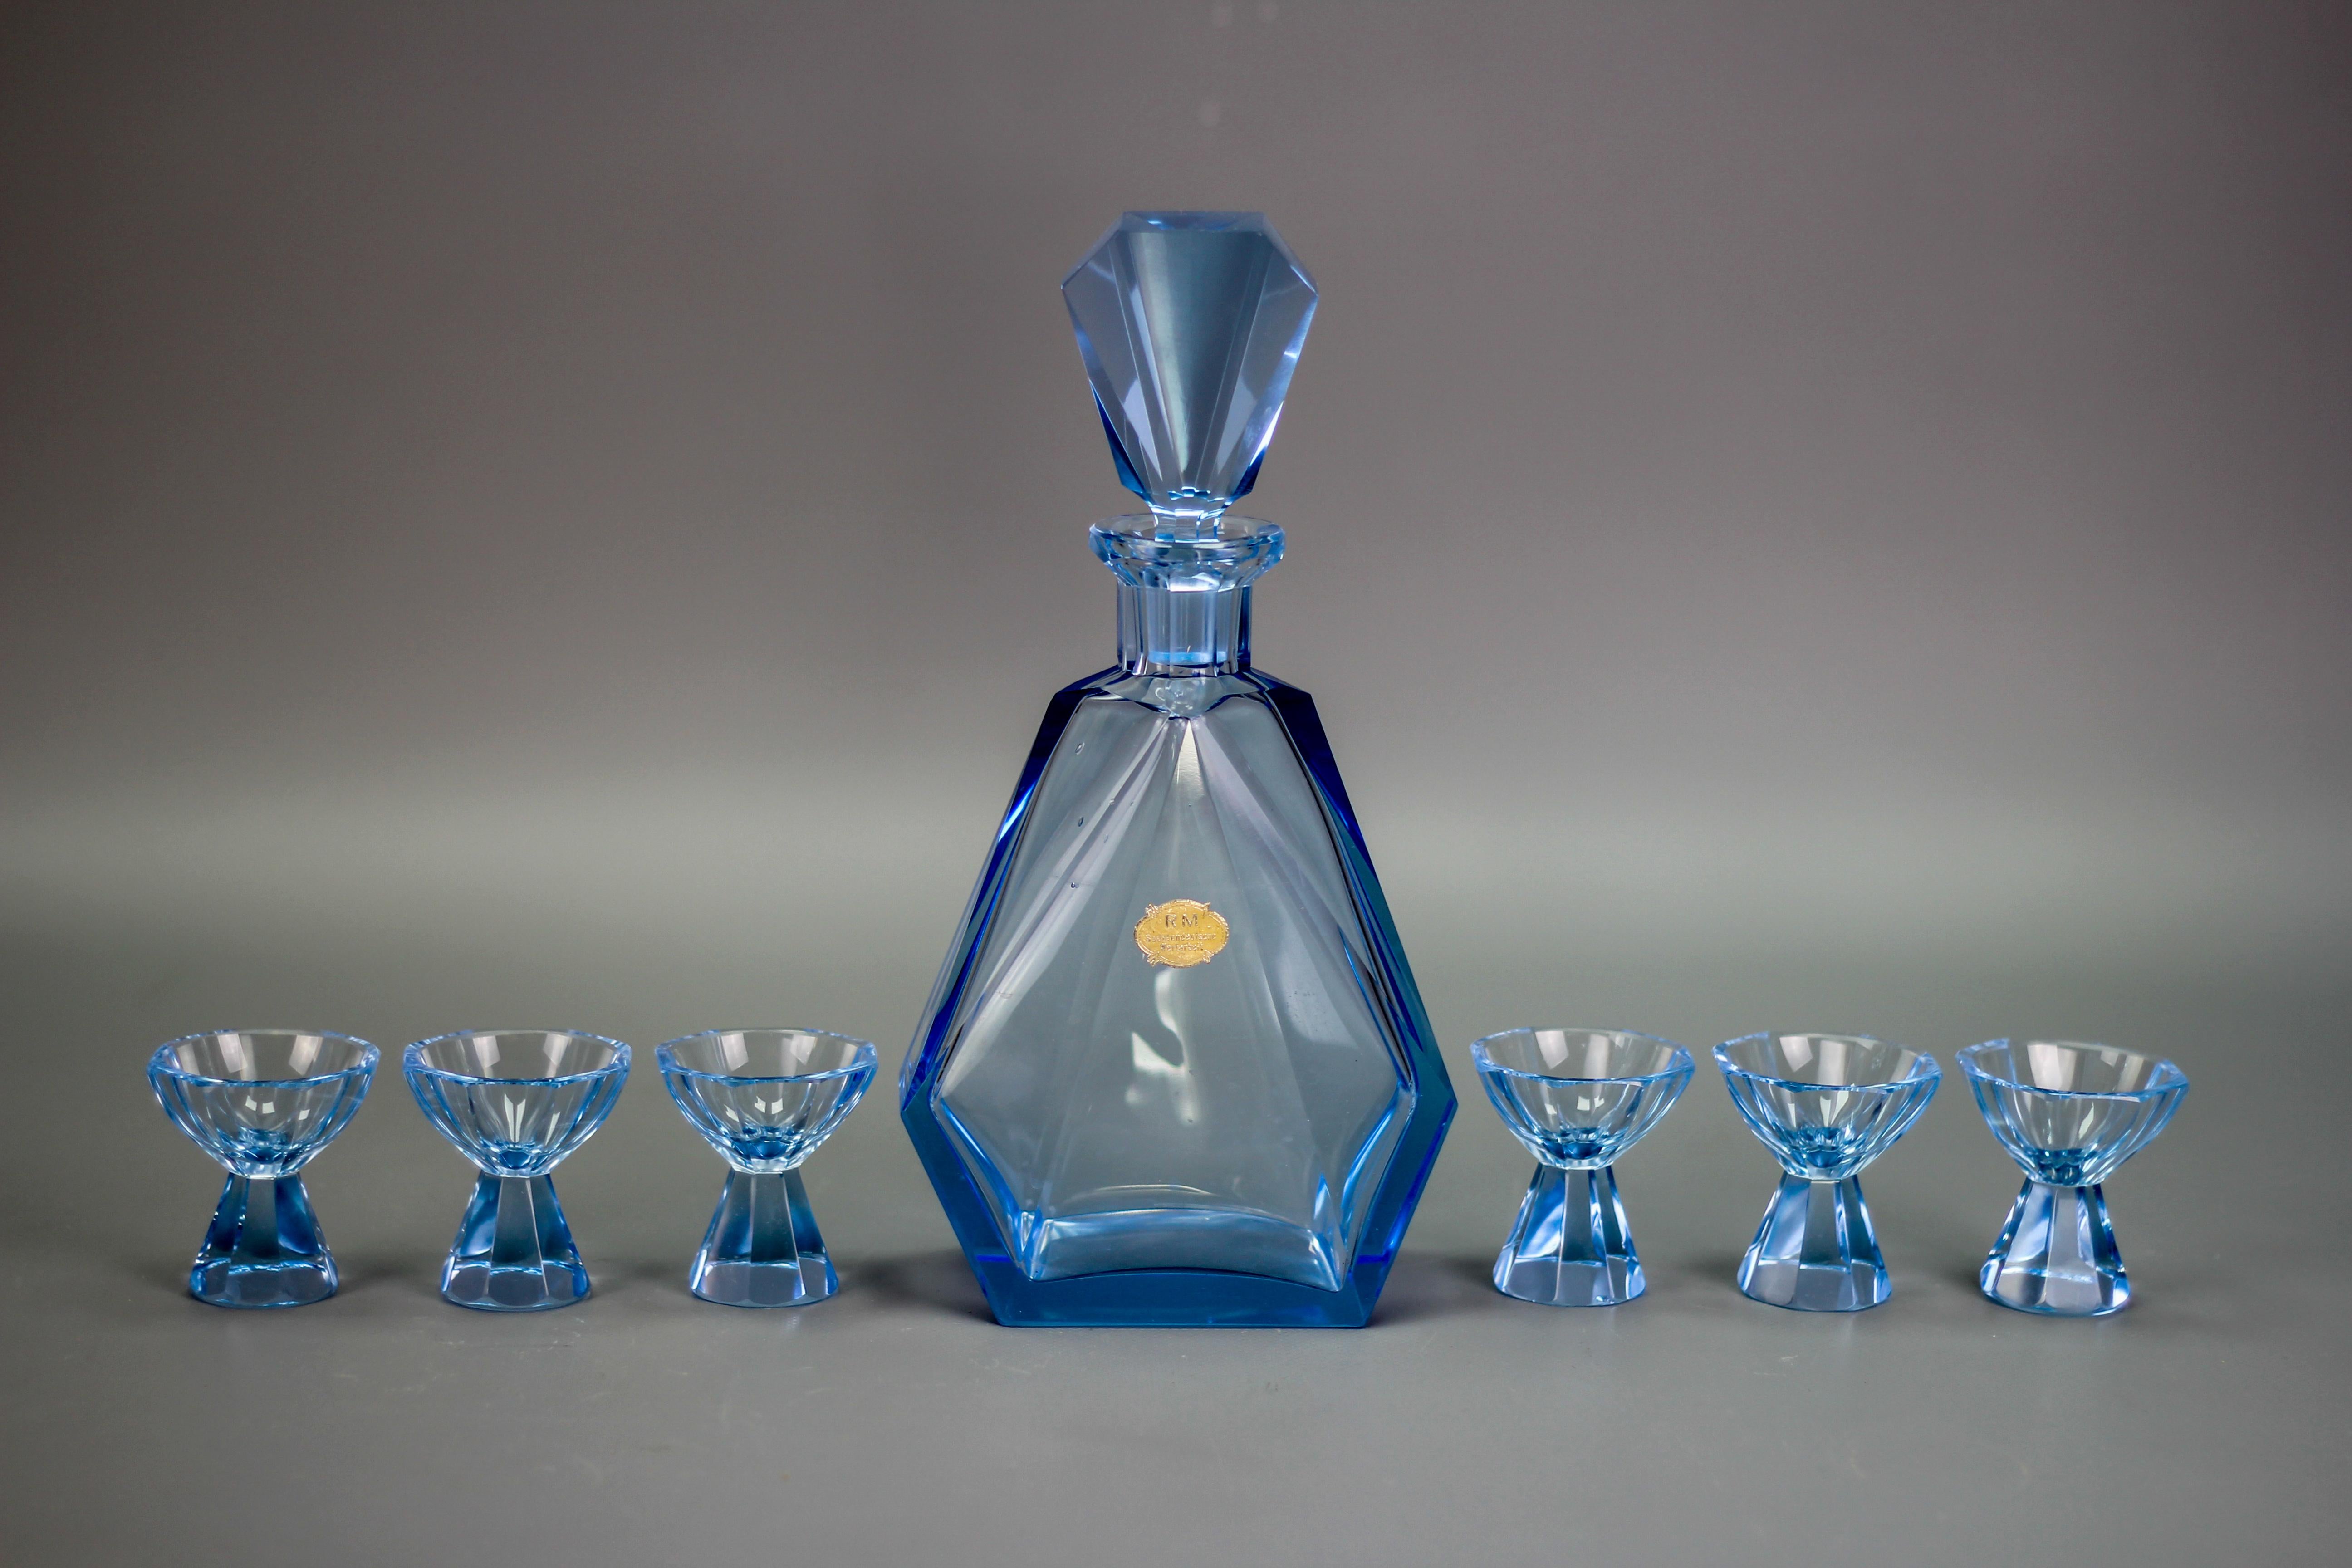 Art Deco blue color Bohemian glass decanter and 6 glasses set, the 1930s
Beautifully colored, handmade Czech Bohemian glass set - decanter and six matching glasses, made in the 1930s. The set is in a very nice light blue color. Label on the